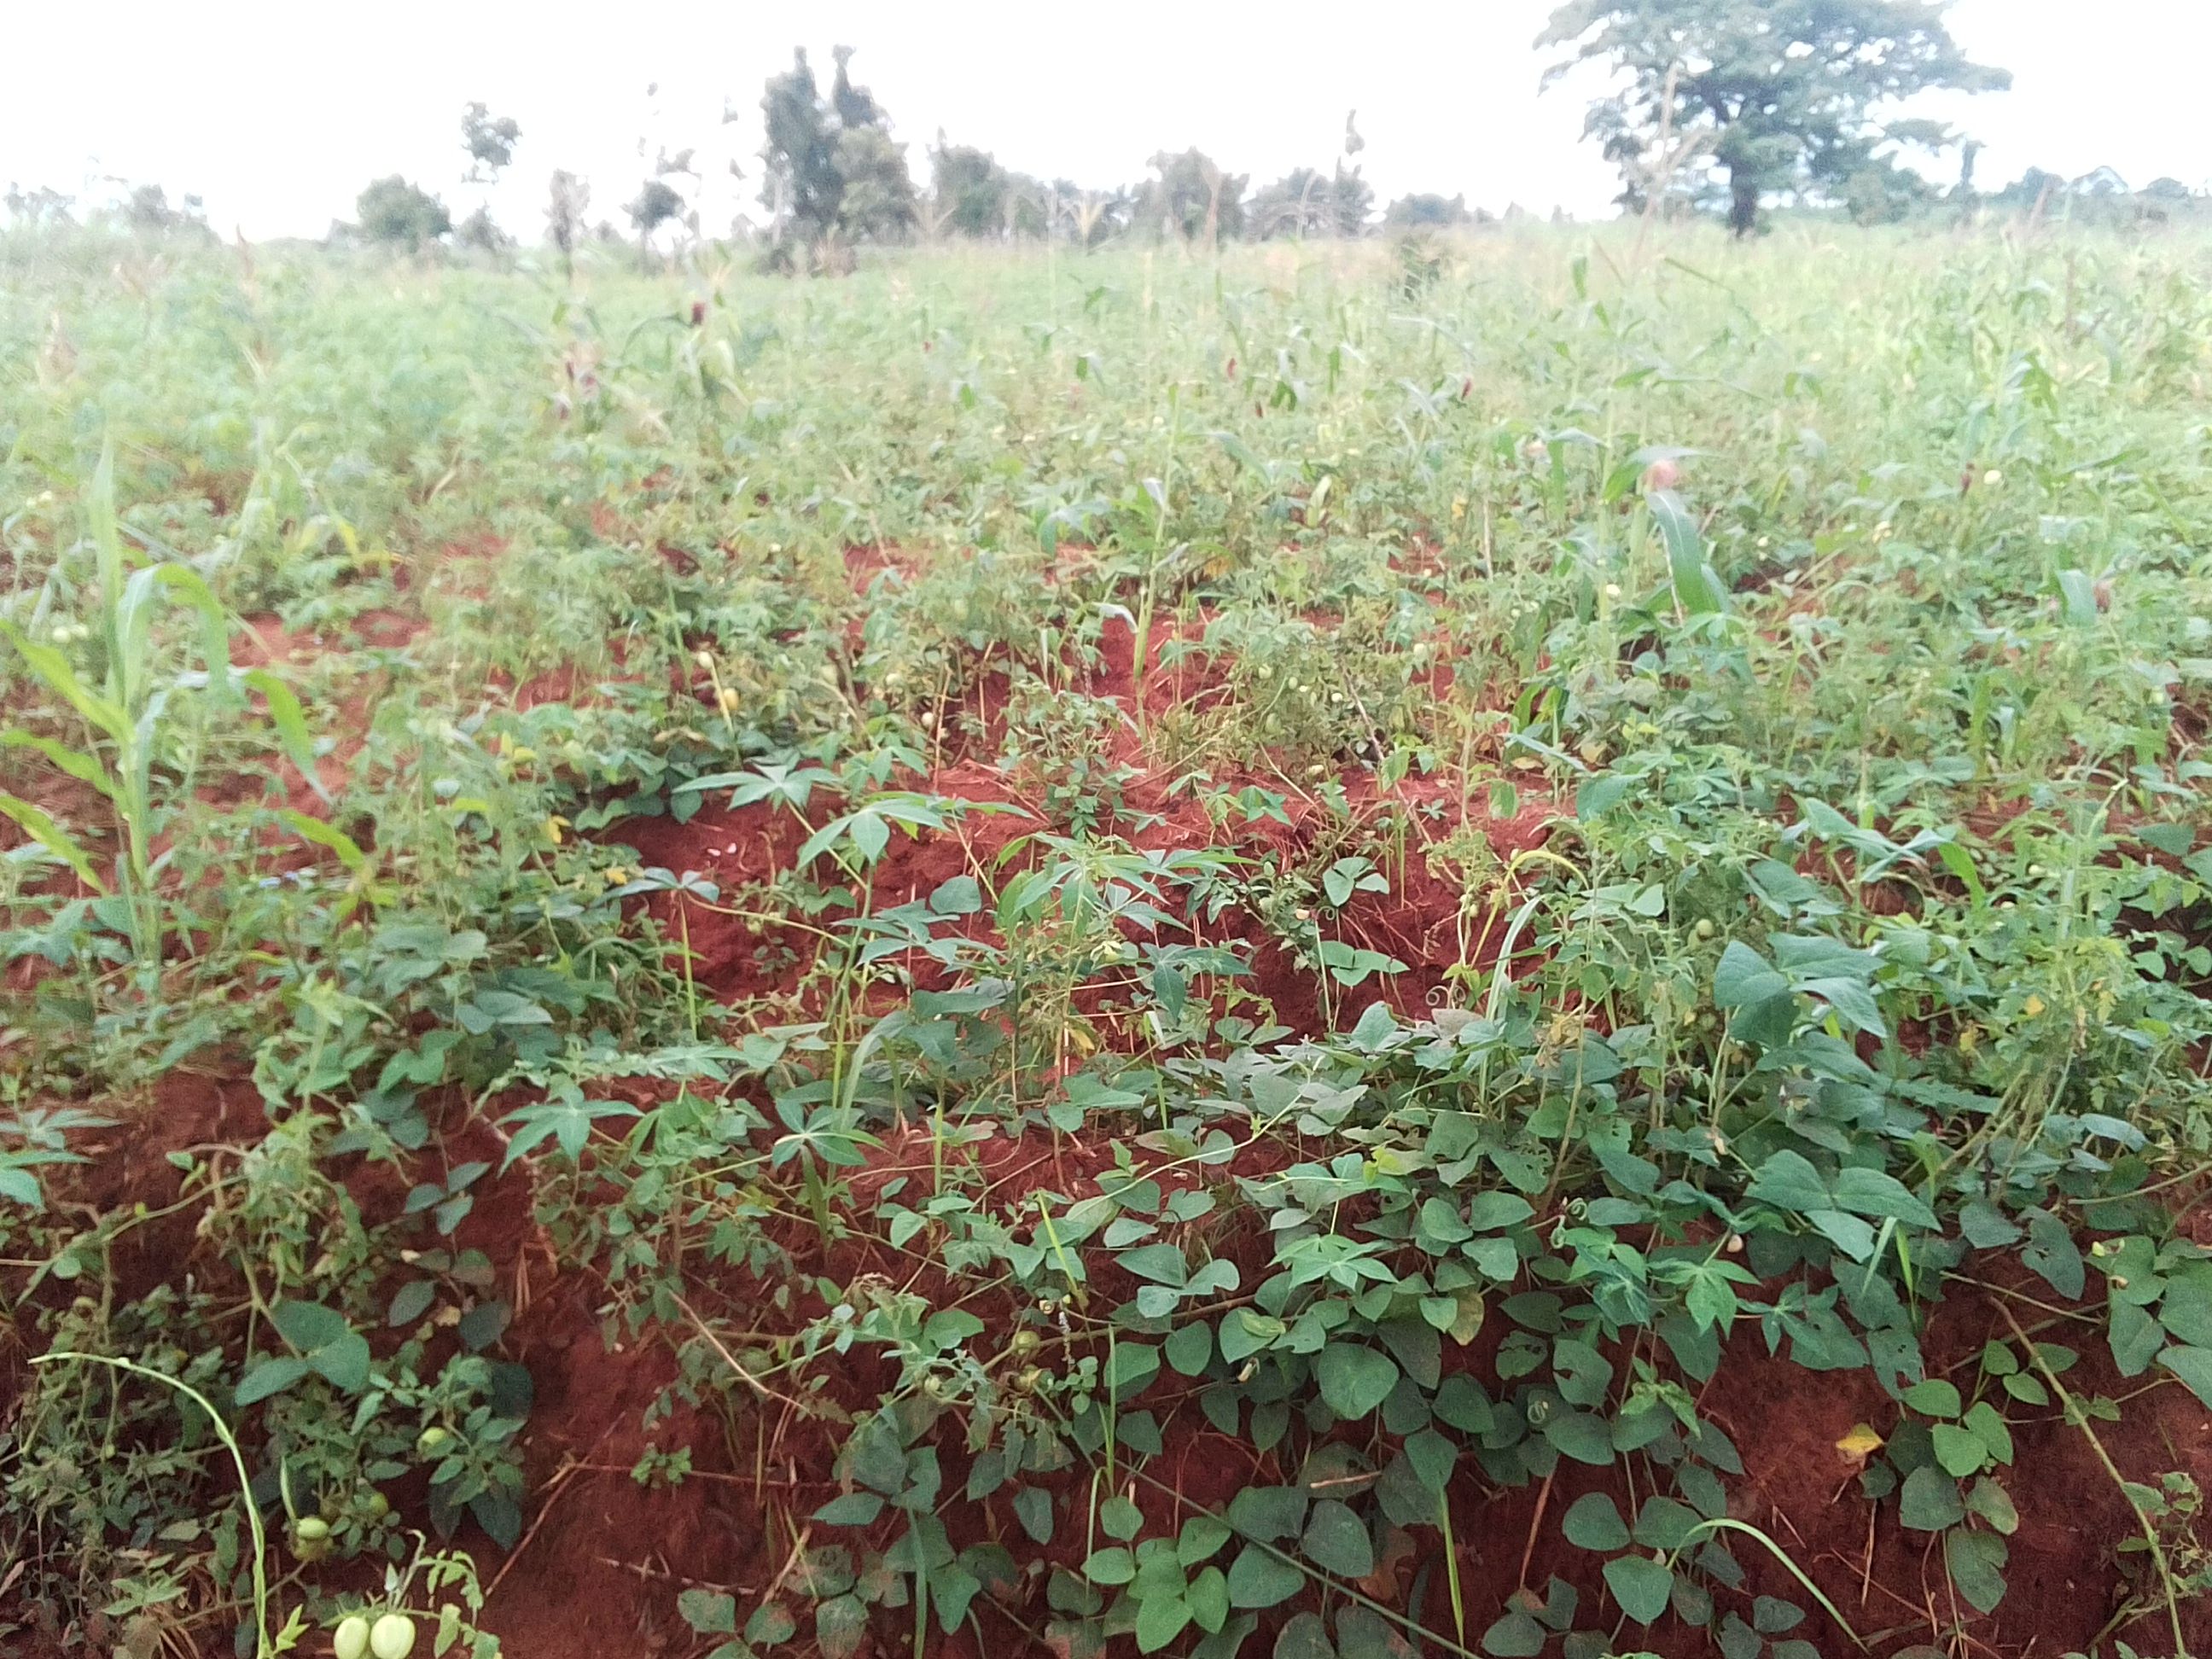 Picture of my farm land,looking at the image you will see a lot of crops,which I engage in mixed cropping, one farm land with a lot of crops their include: Tomatoes, cassava, Maize,okro.